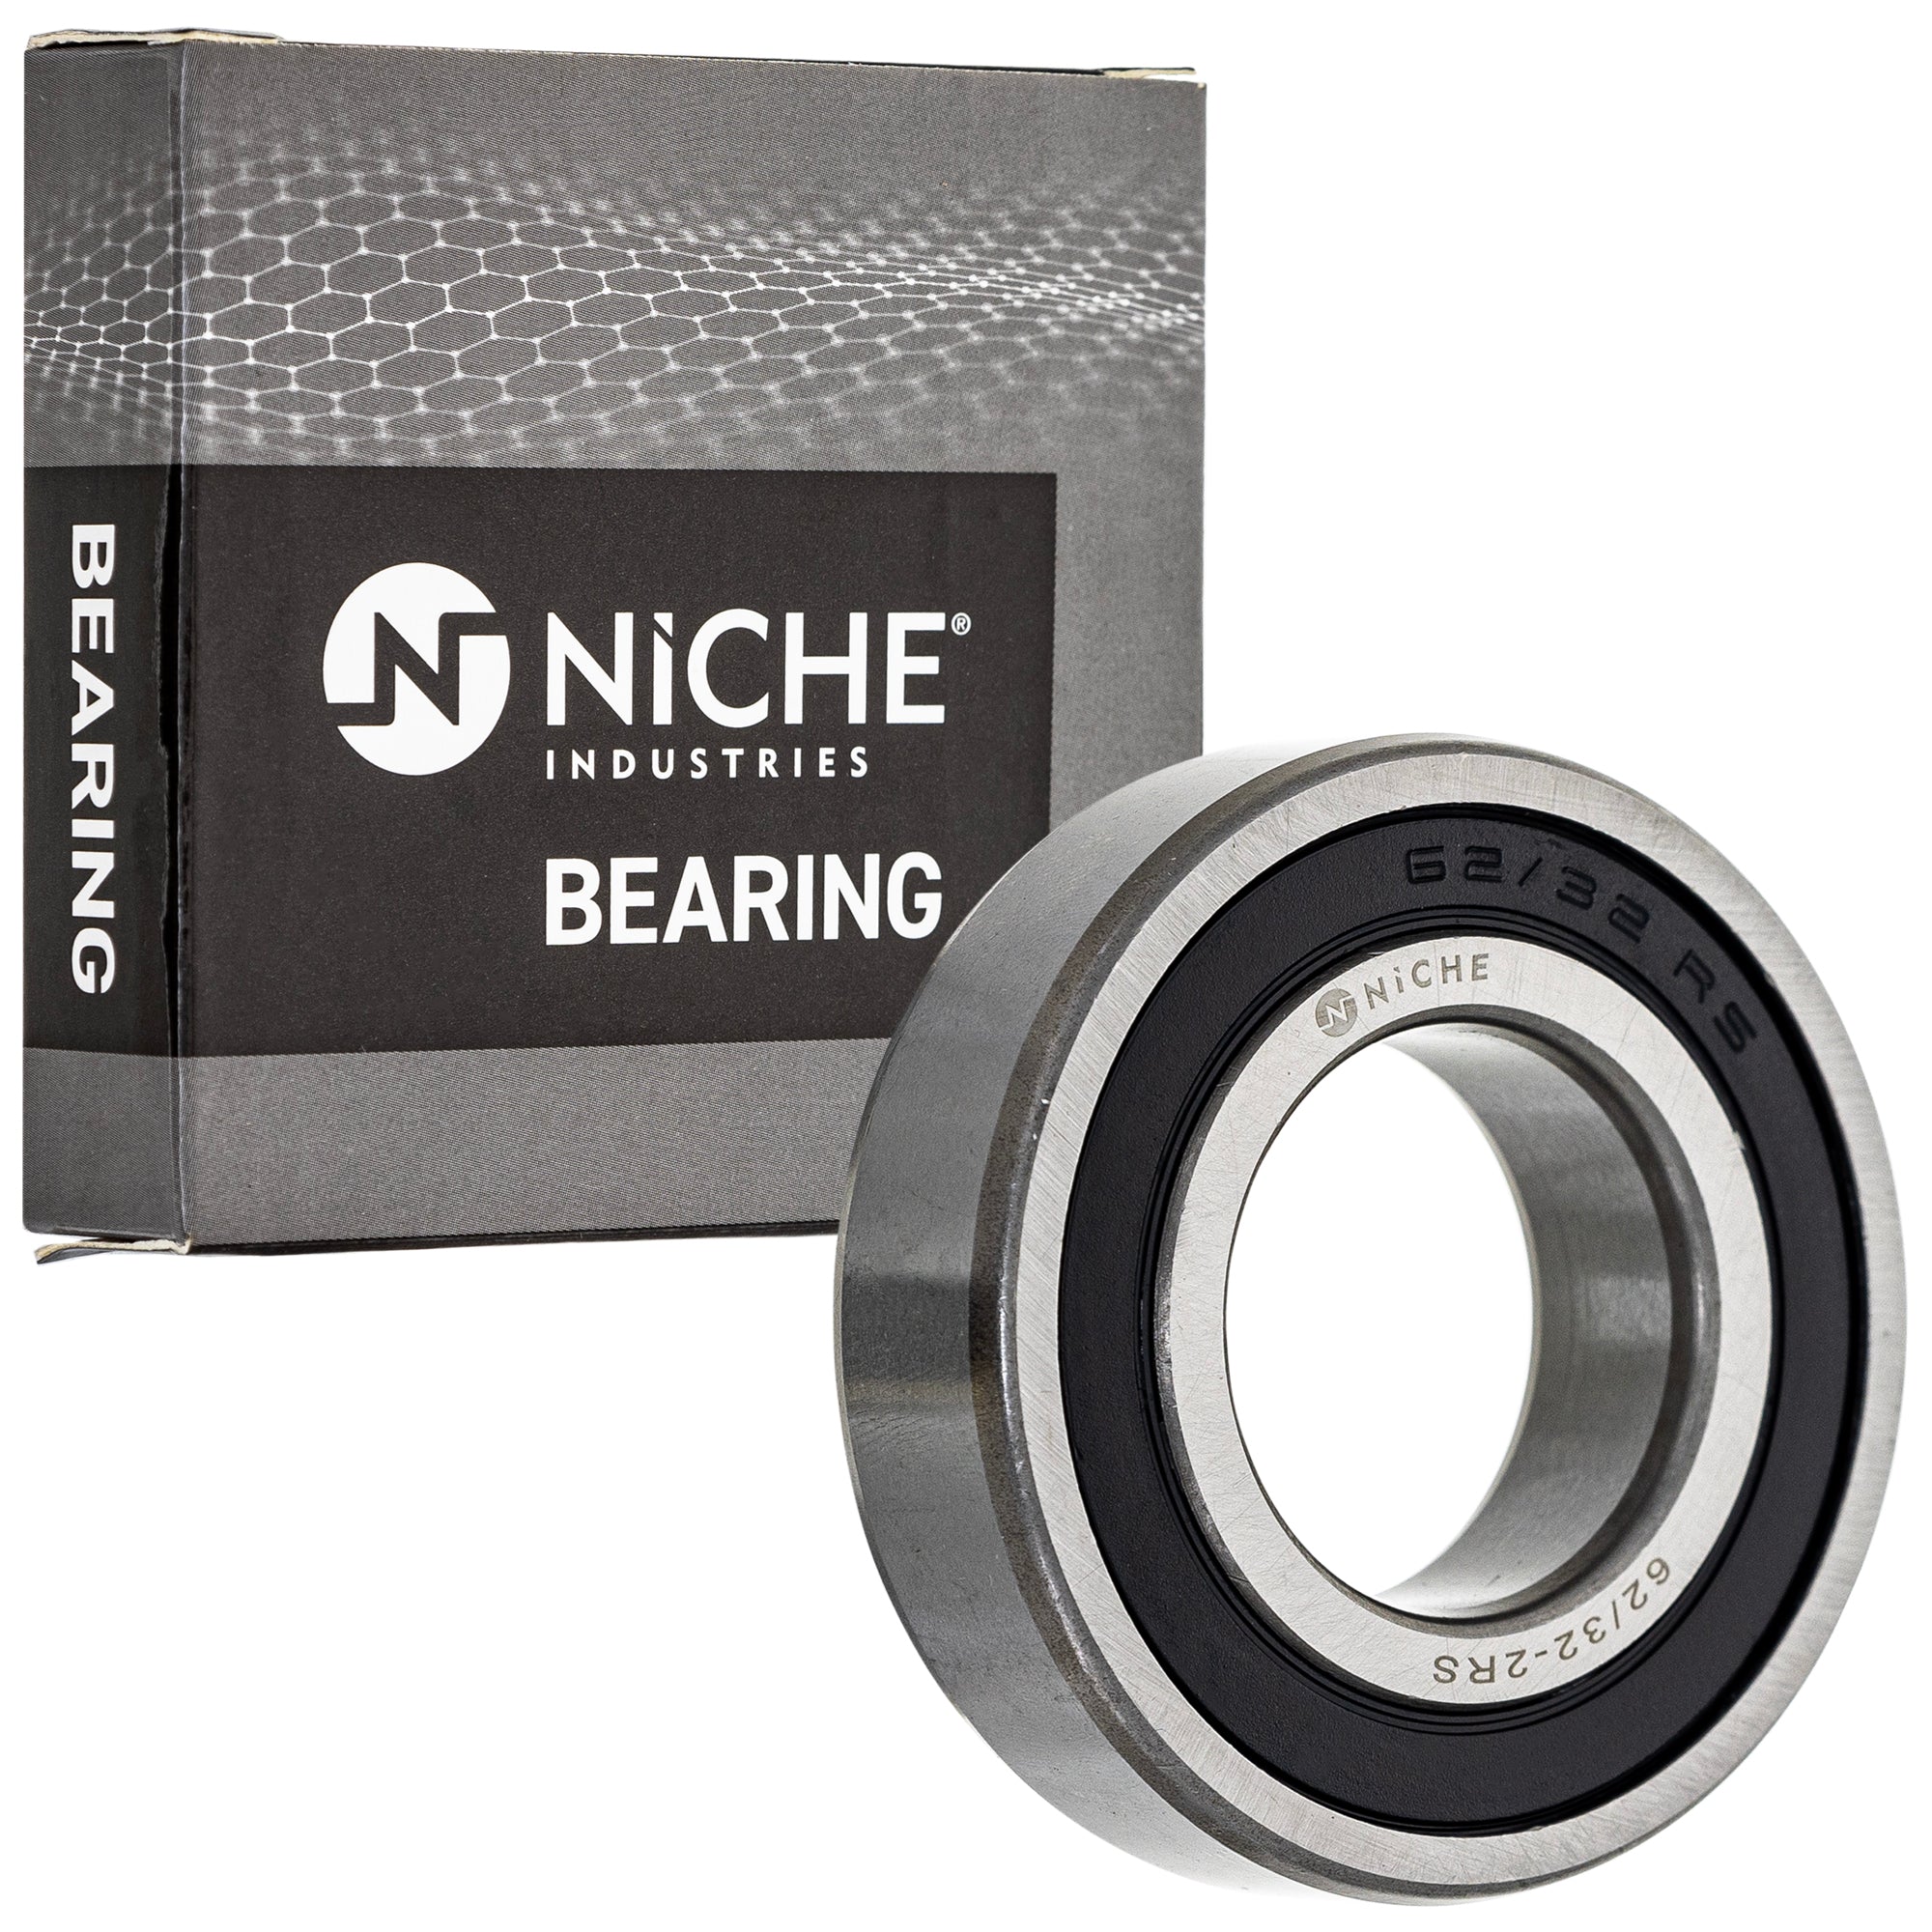 NICHE 519-CBB2282R Bearing & Seal Kit 2-Pack for zOTHER